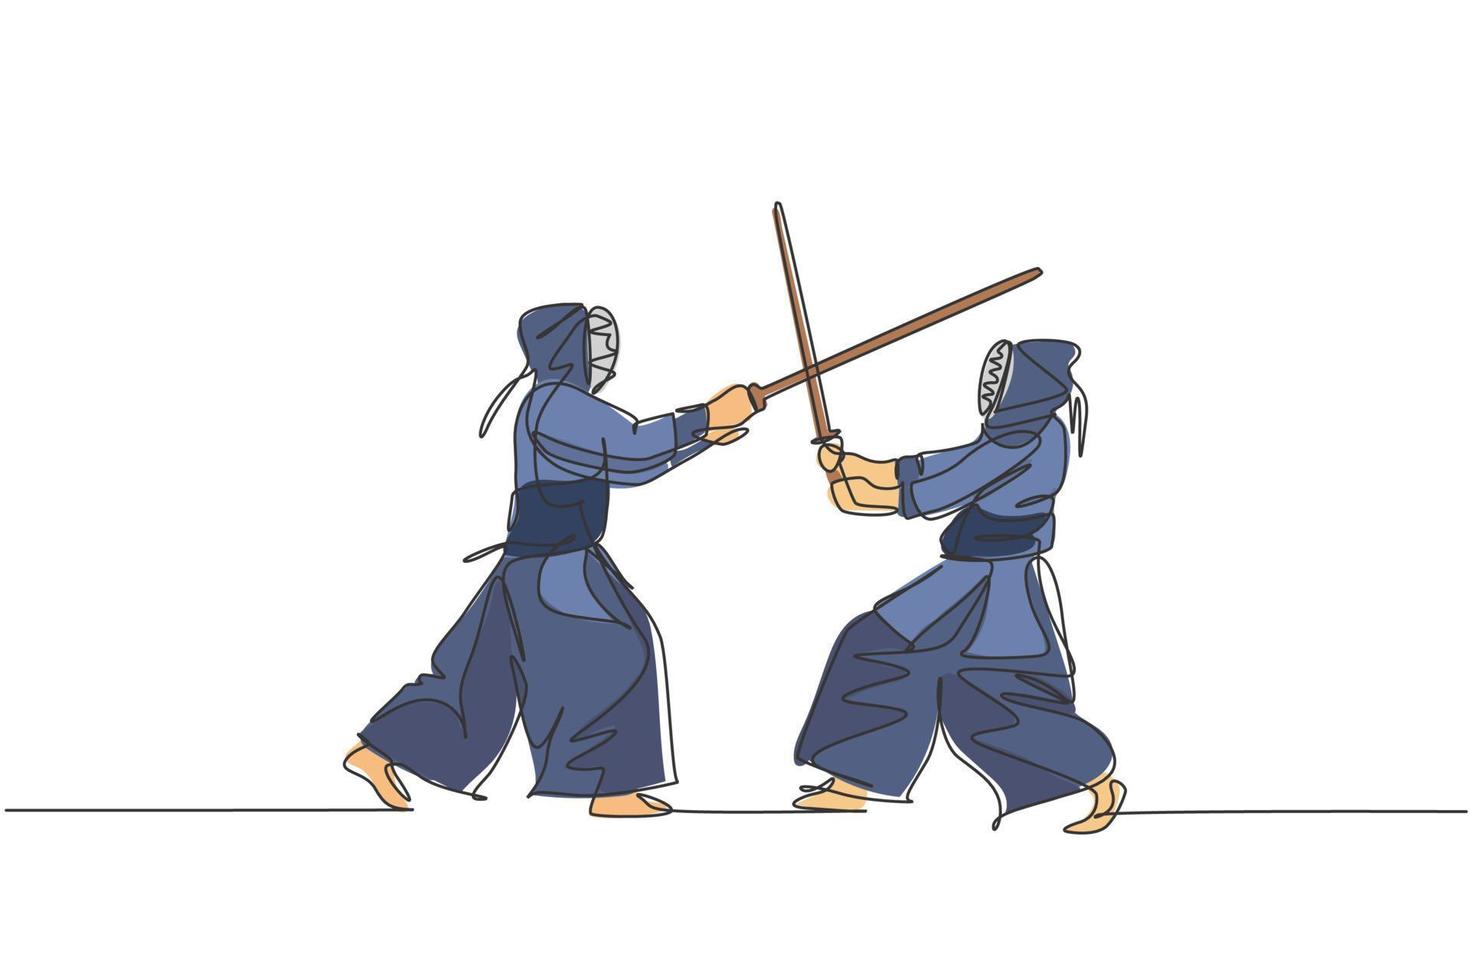 One single line drawing of two young energetic men exercise sparring fight kendo with wooden sword at gym center vector illustration. Combative fight sport concept. Modern continuous line draw design